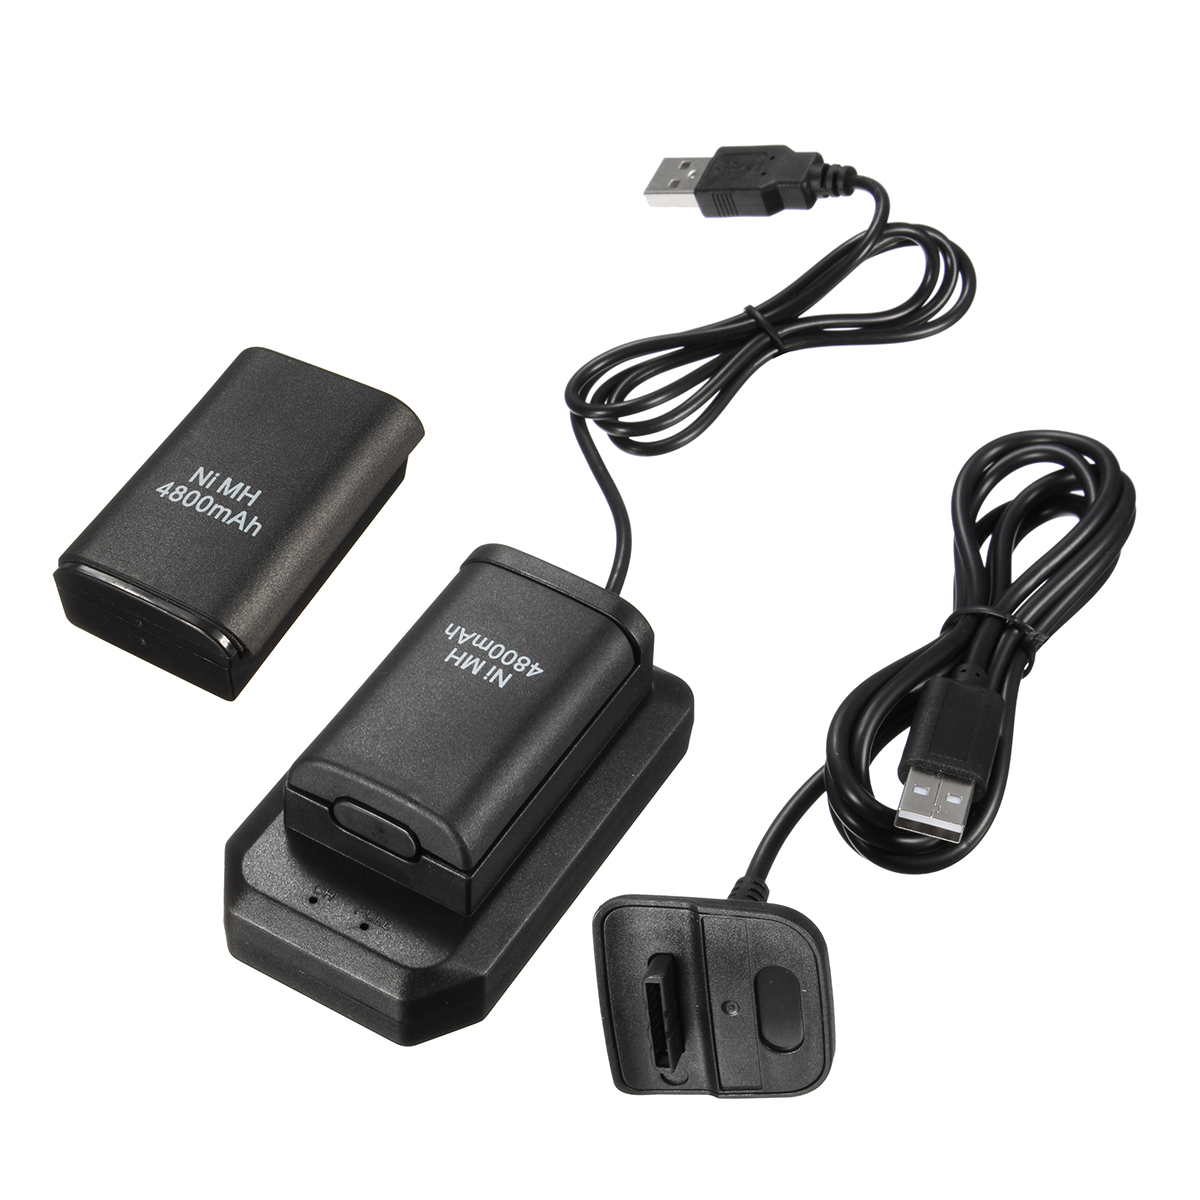 4800mAh Rechargeable Battery Pack Charging Kit For Xbox 360 Battery Wireless Controller